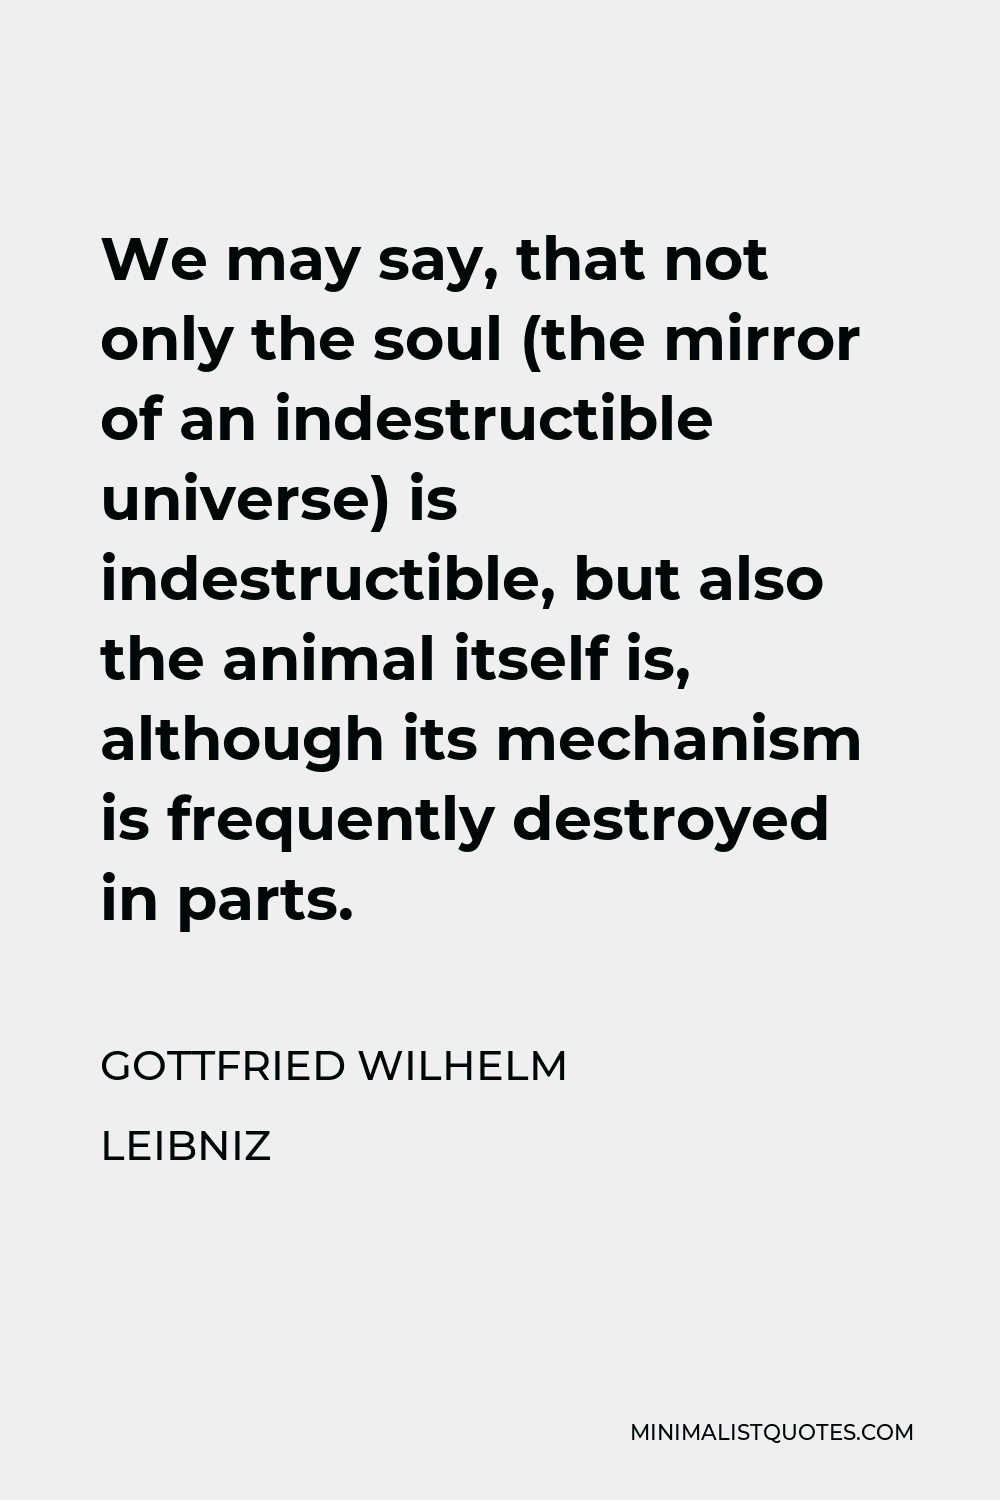 Gottfried Wilhelm Leibniz Quote - We may say, that not only the soul (the mirror of an indestructible universe) is indestructible, but also the animal itself is, although its mechanism is frequently destroyed in parts.